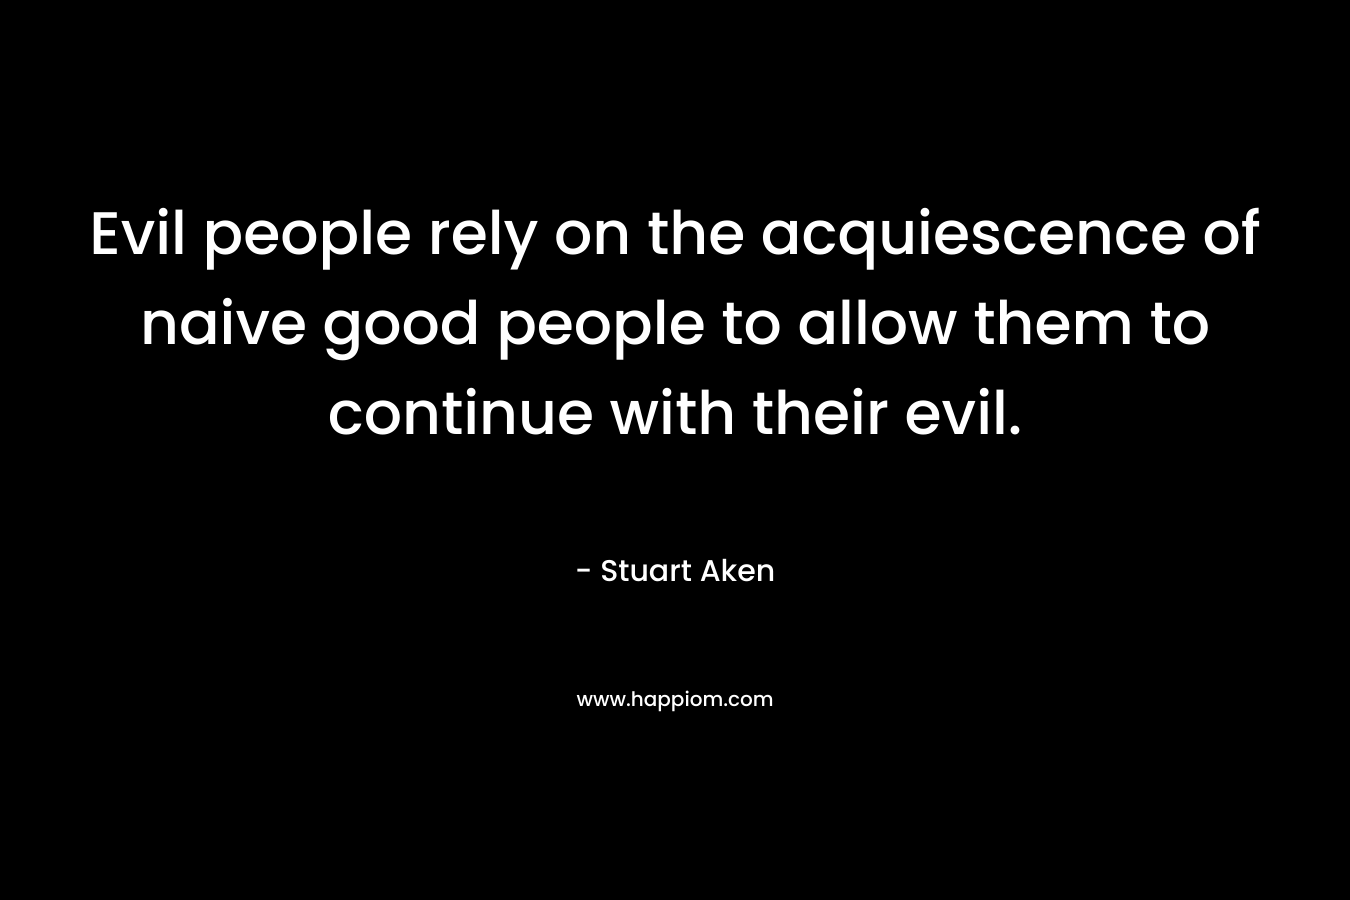 Evil people rely on the acquiescence of naive good people to allow them to continue with their evil. – Stuart Aken